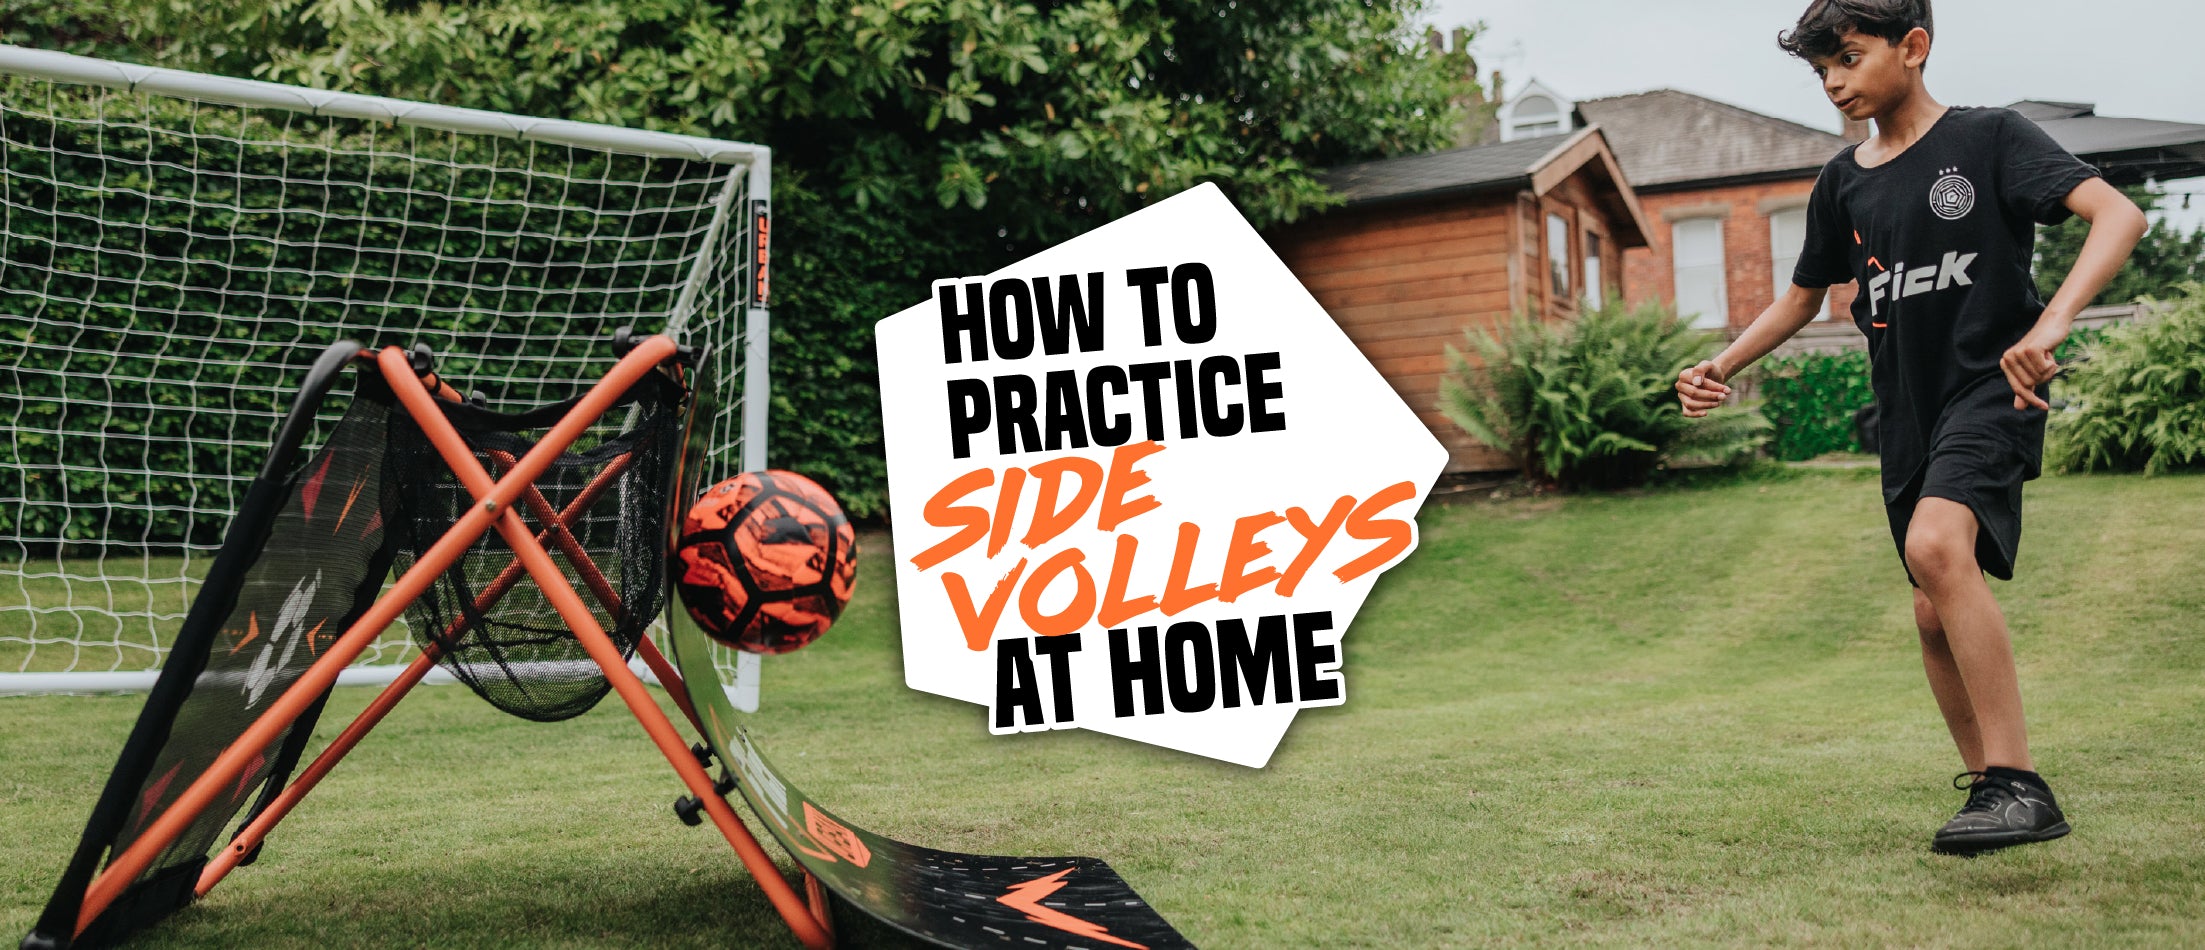 How to Practice SIDE VOLLEYS at home